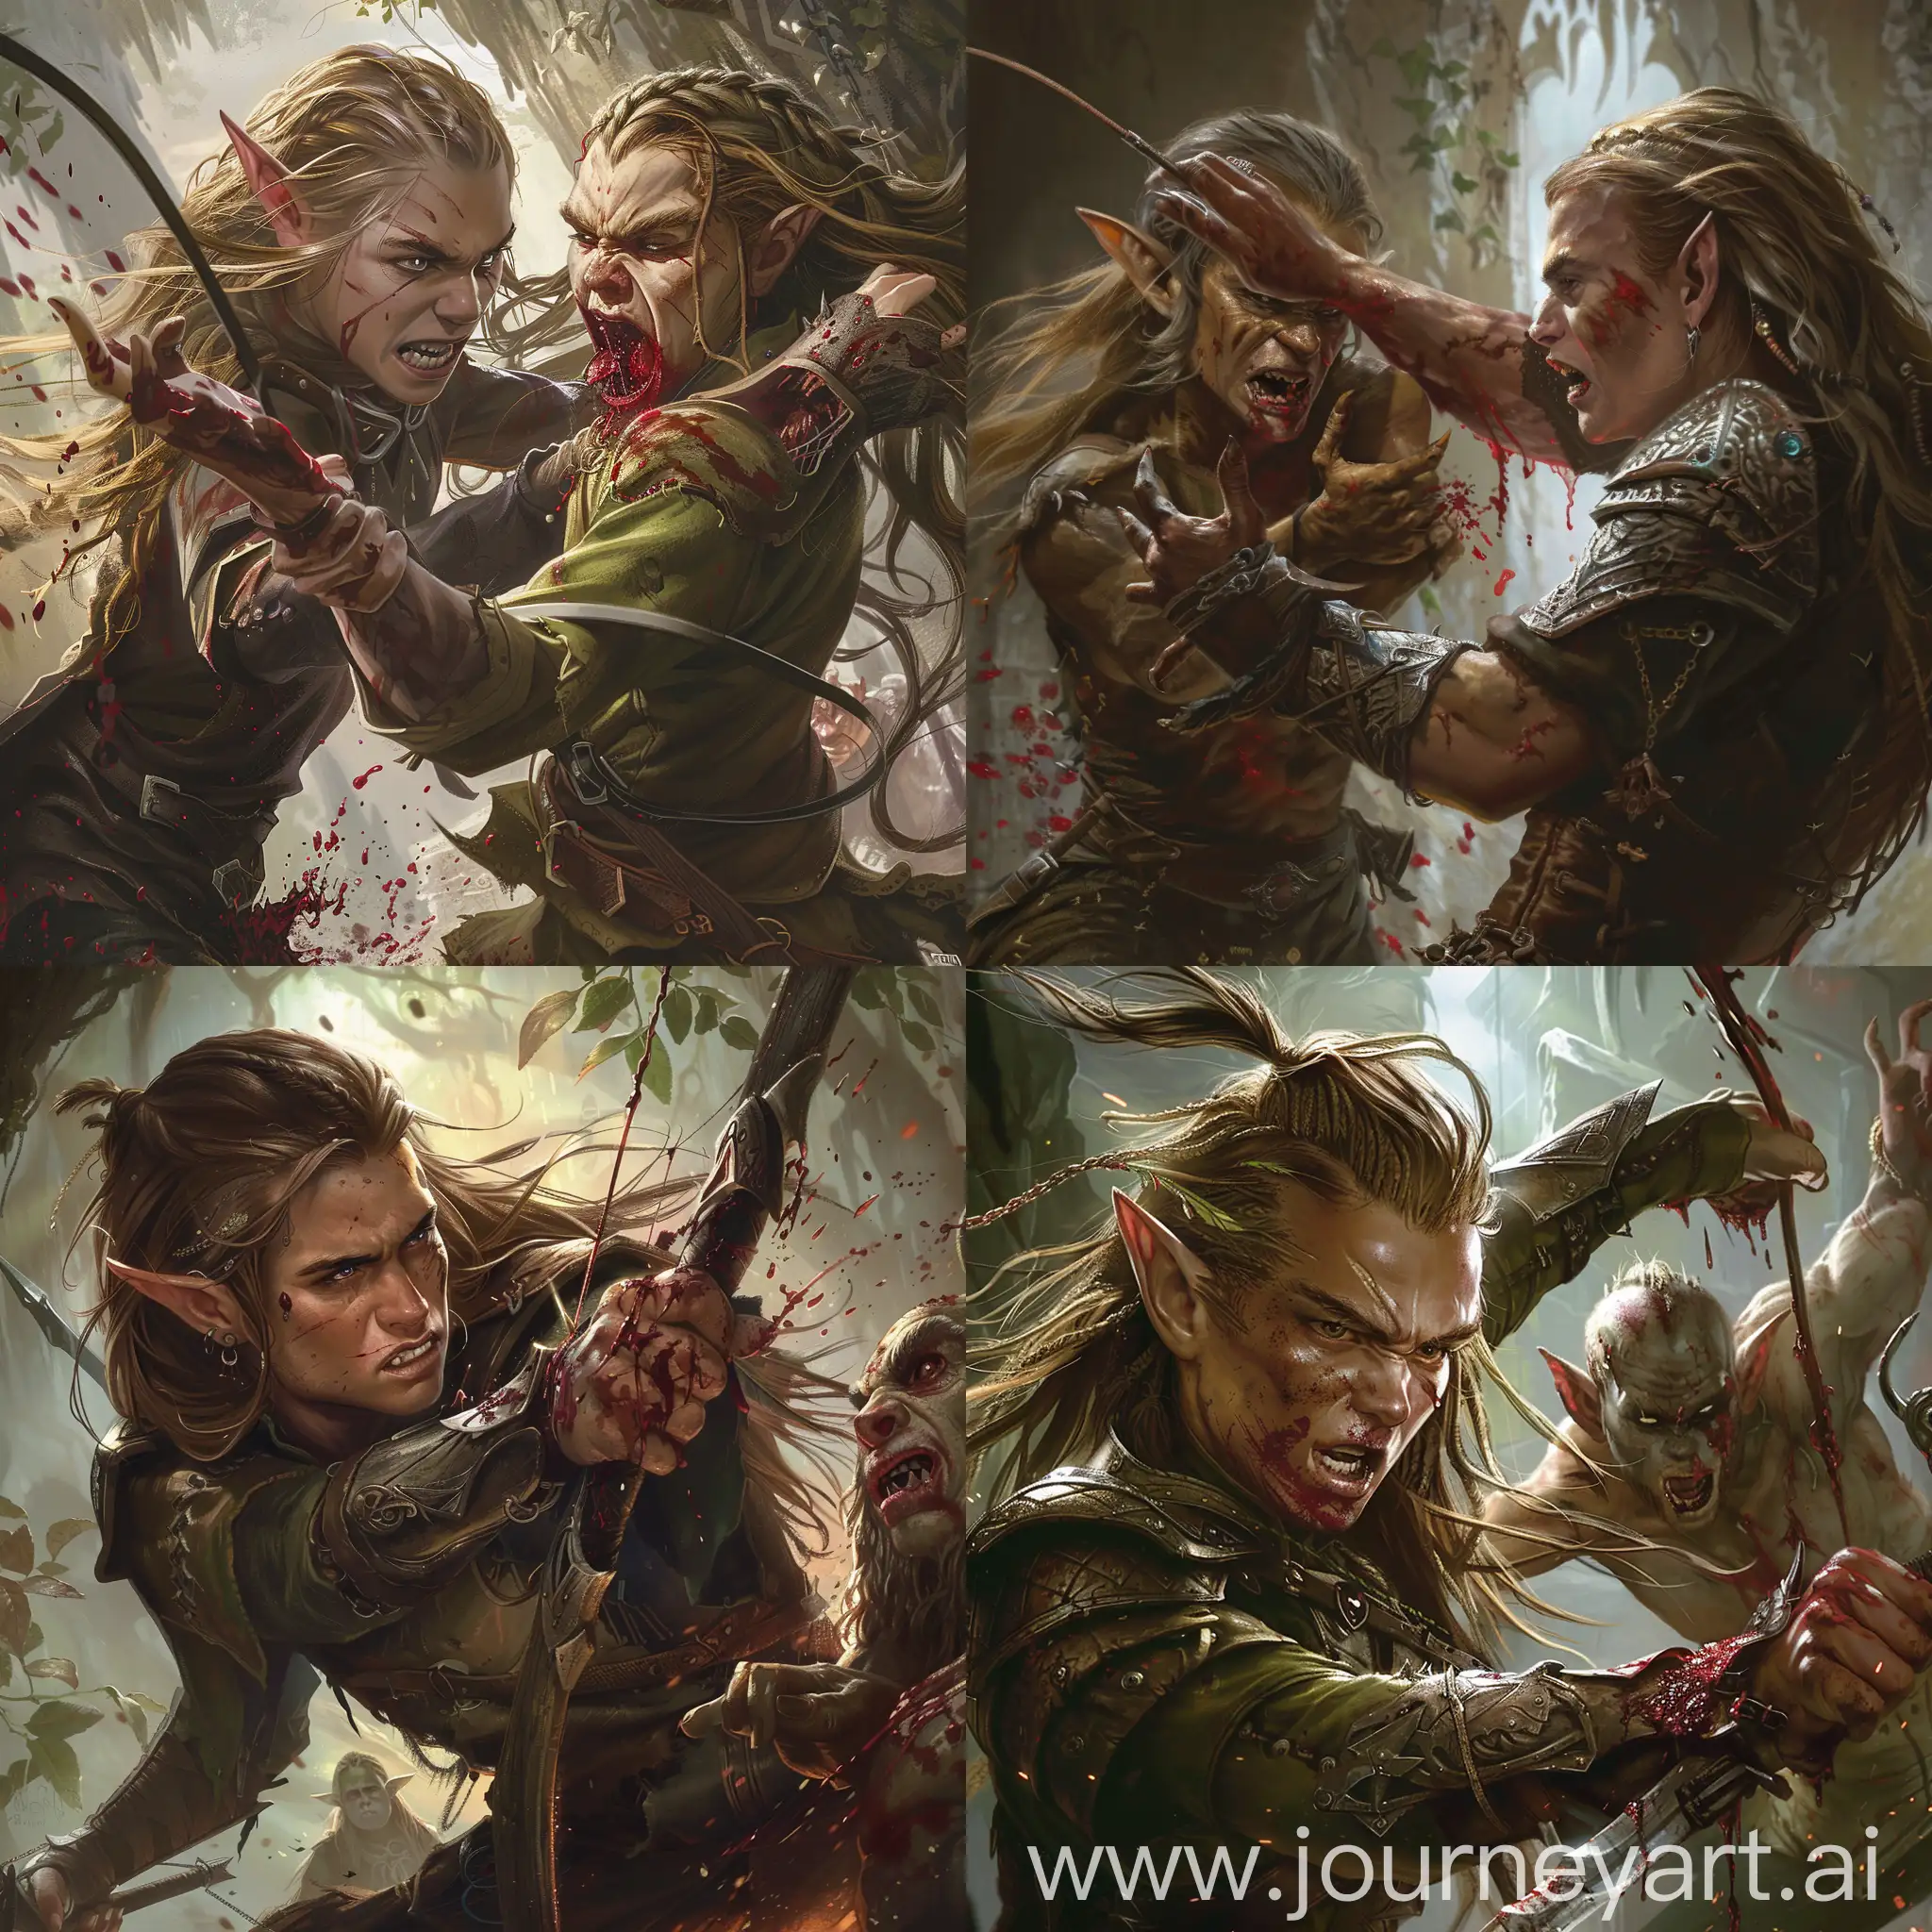 Young elf male, beautiful face, long hair, fights a goblin, elf wields whip, goblin is very bloody. 